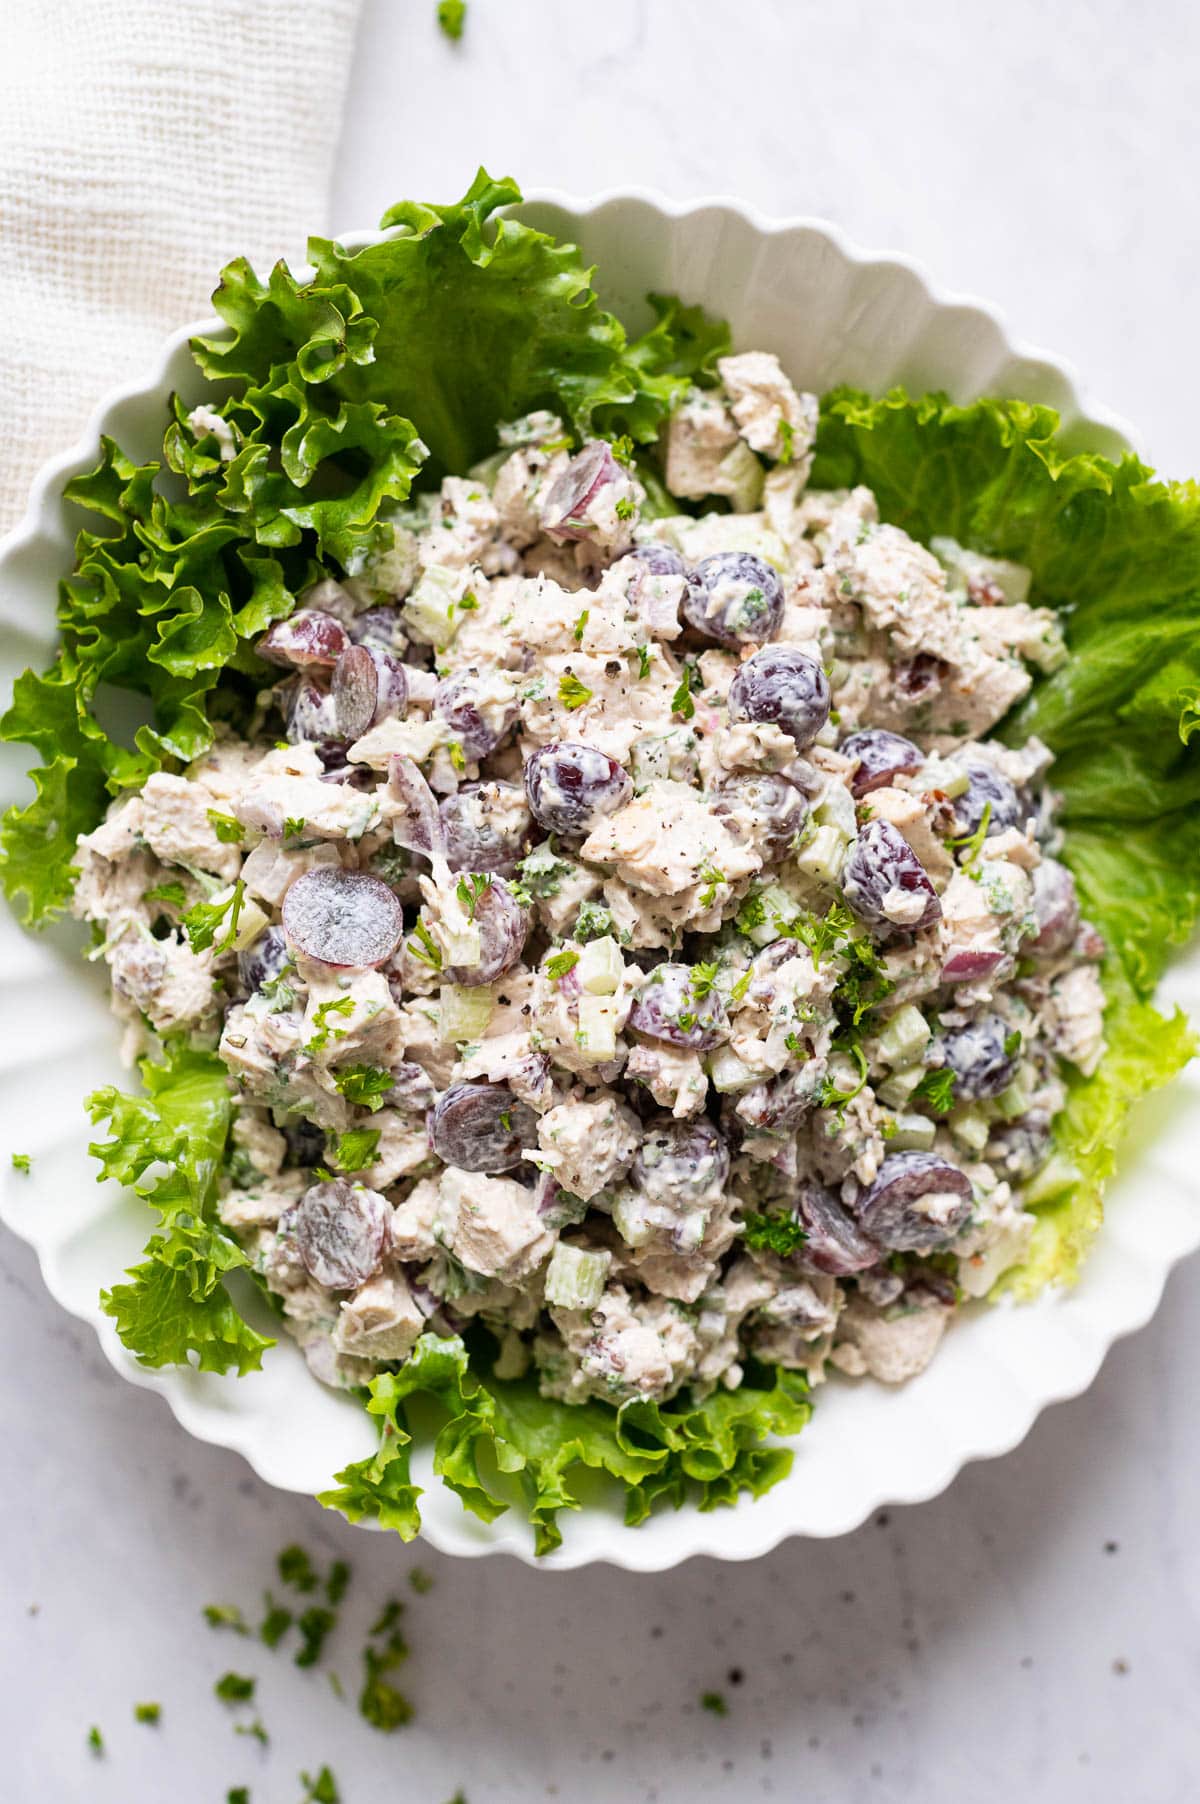 Classic chicken salad recipe served on a bed of lettuce leaves in a bowl.